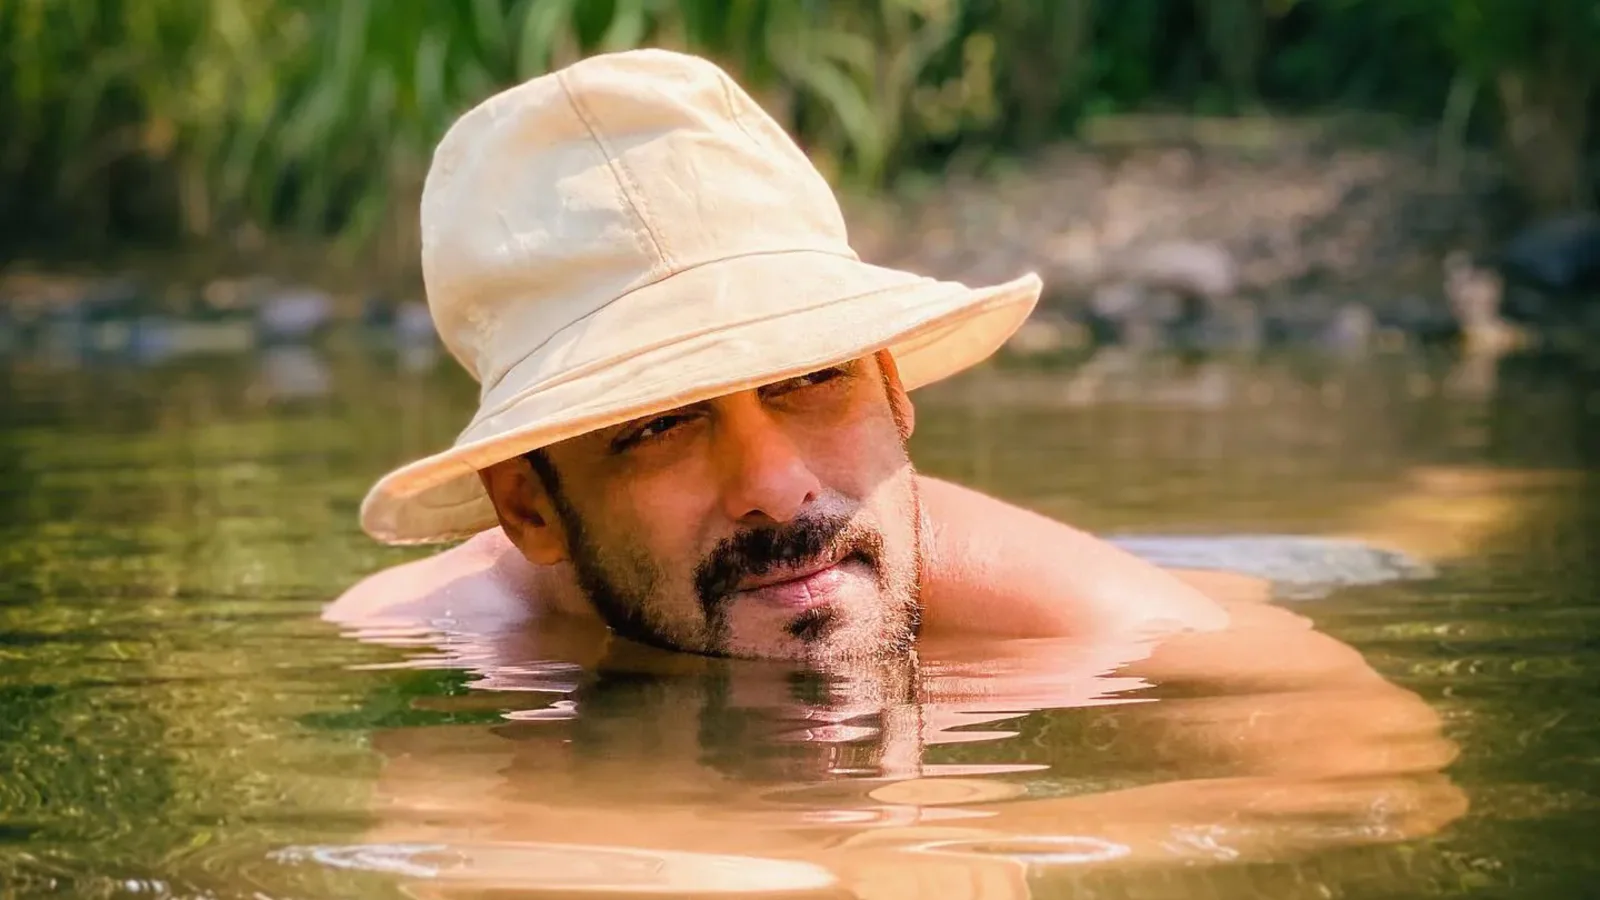 Salman Khan goes swimming in a pond, fans share hilarious comments: ‘Next film mein crocodile ka role mila hai?’